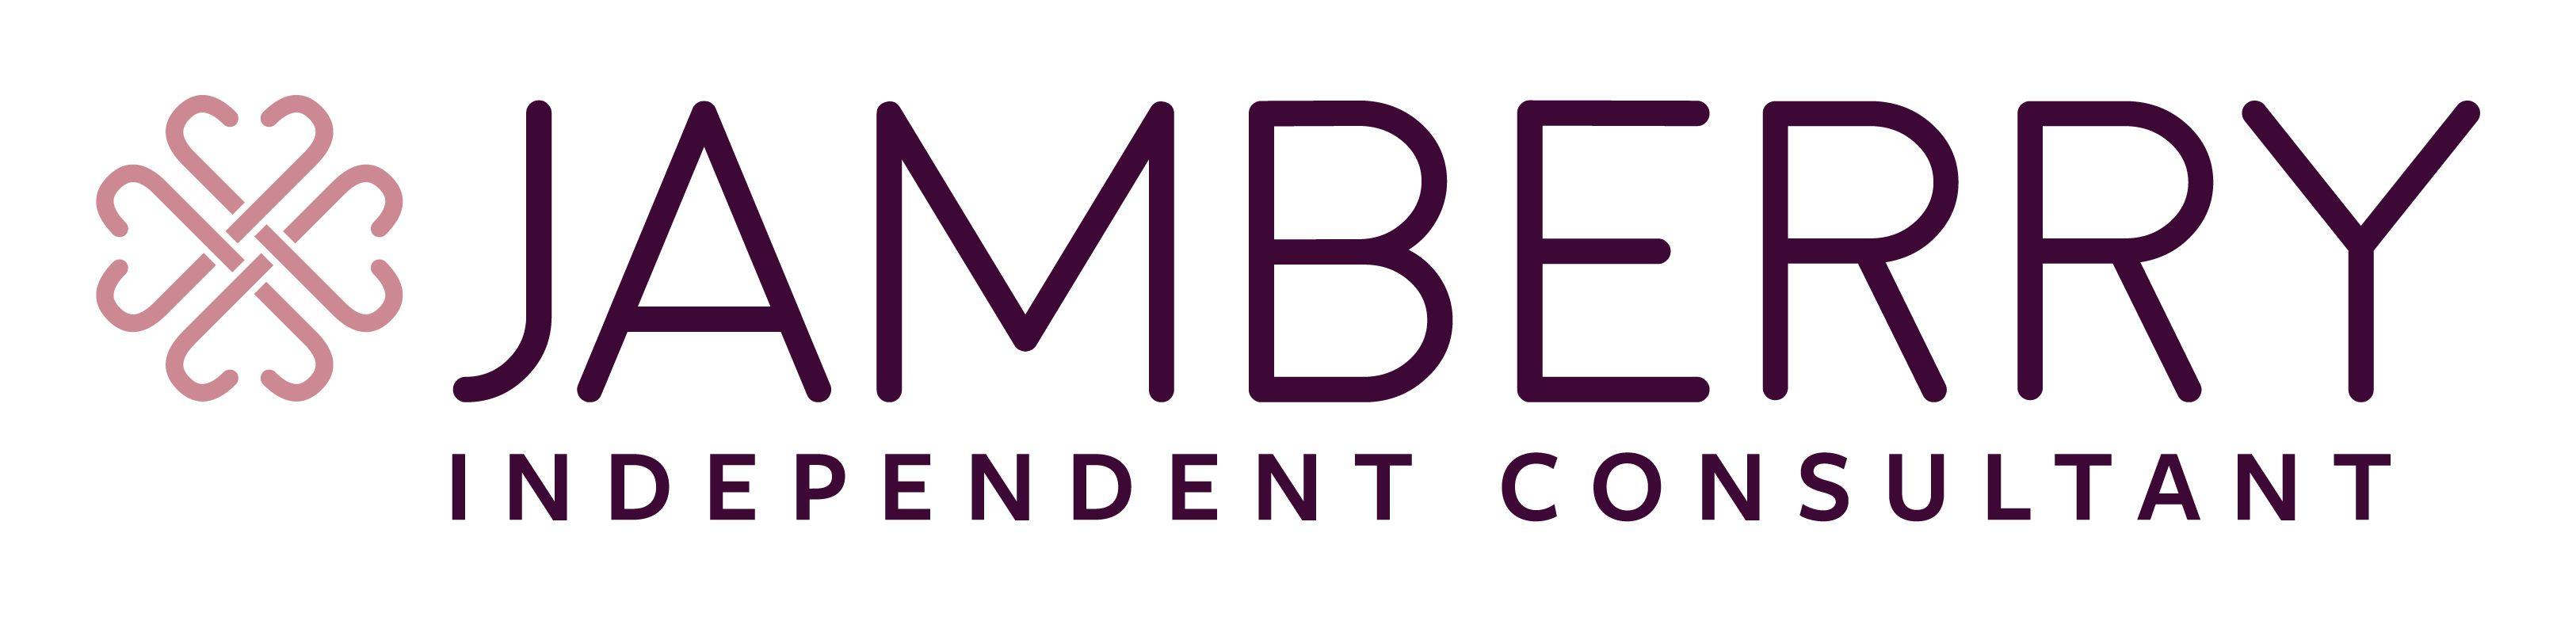 Jamberry Independent Consultant Logo - Current (as of July 2017) Jamberry Independent Consultant Logo